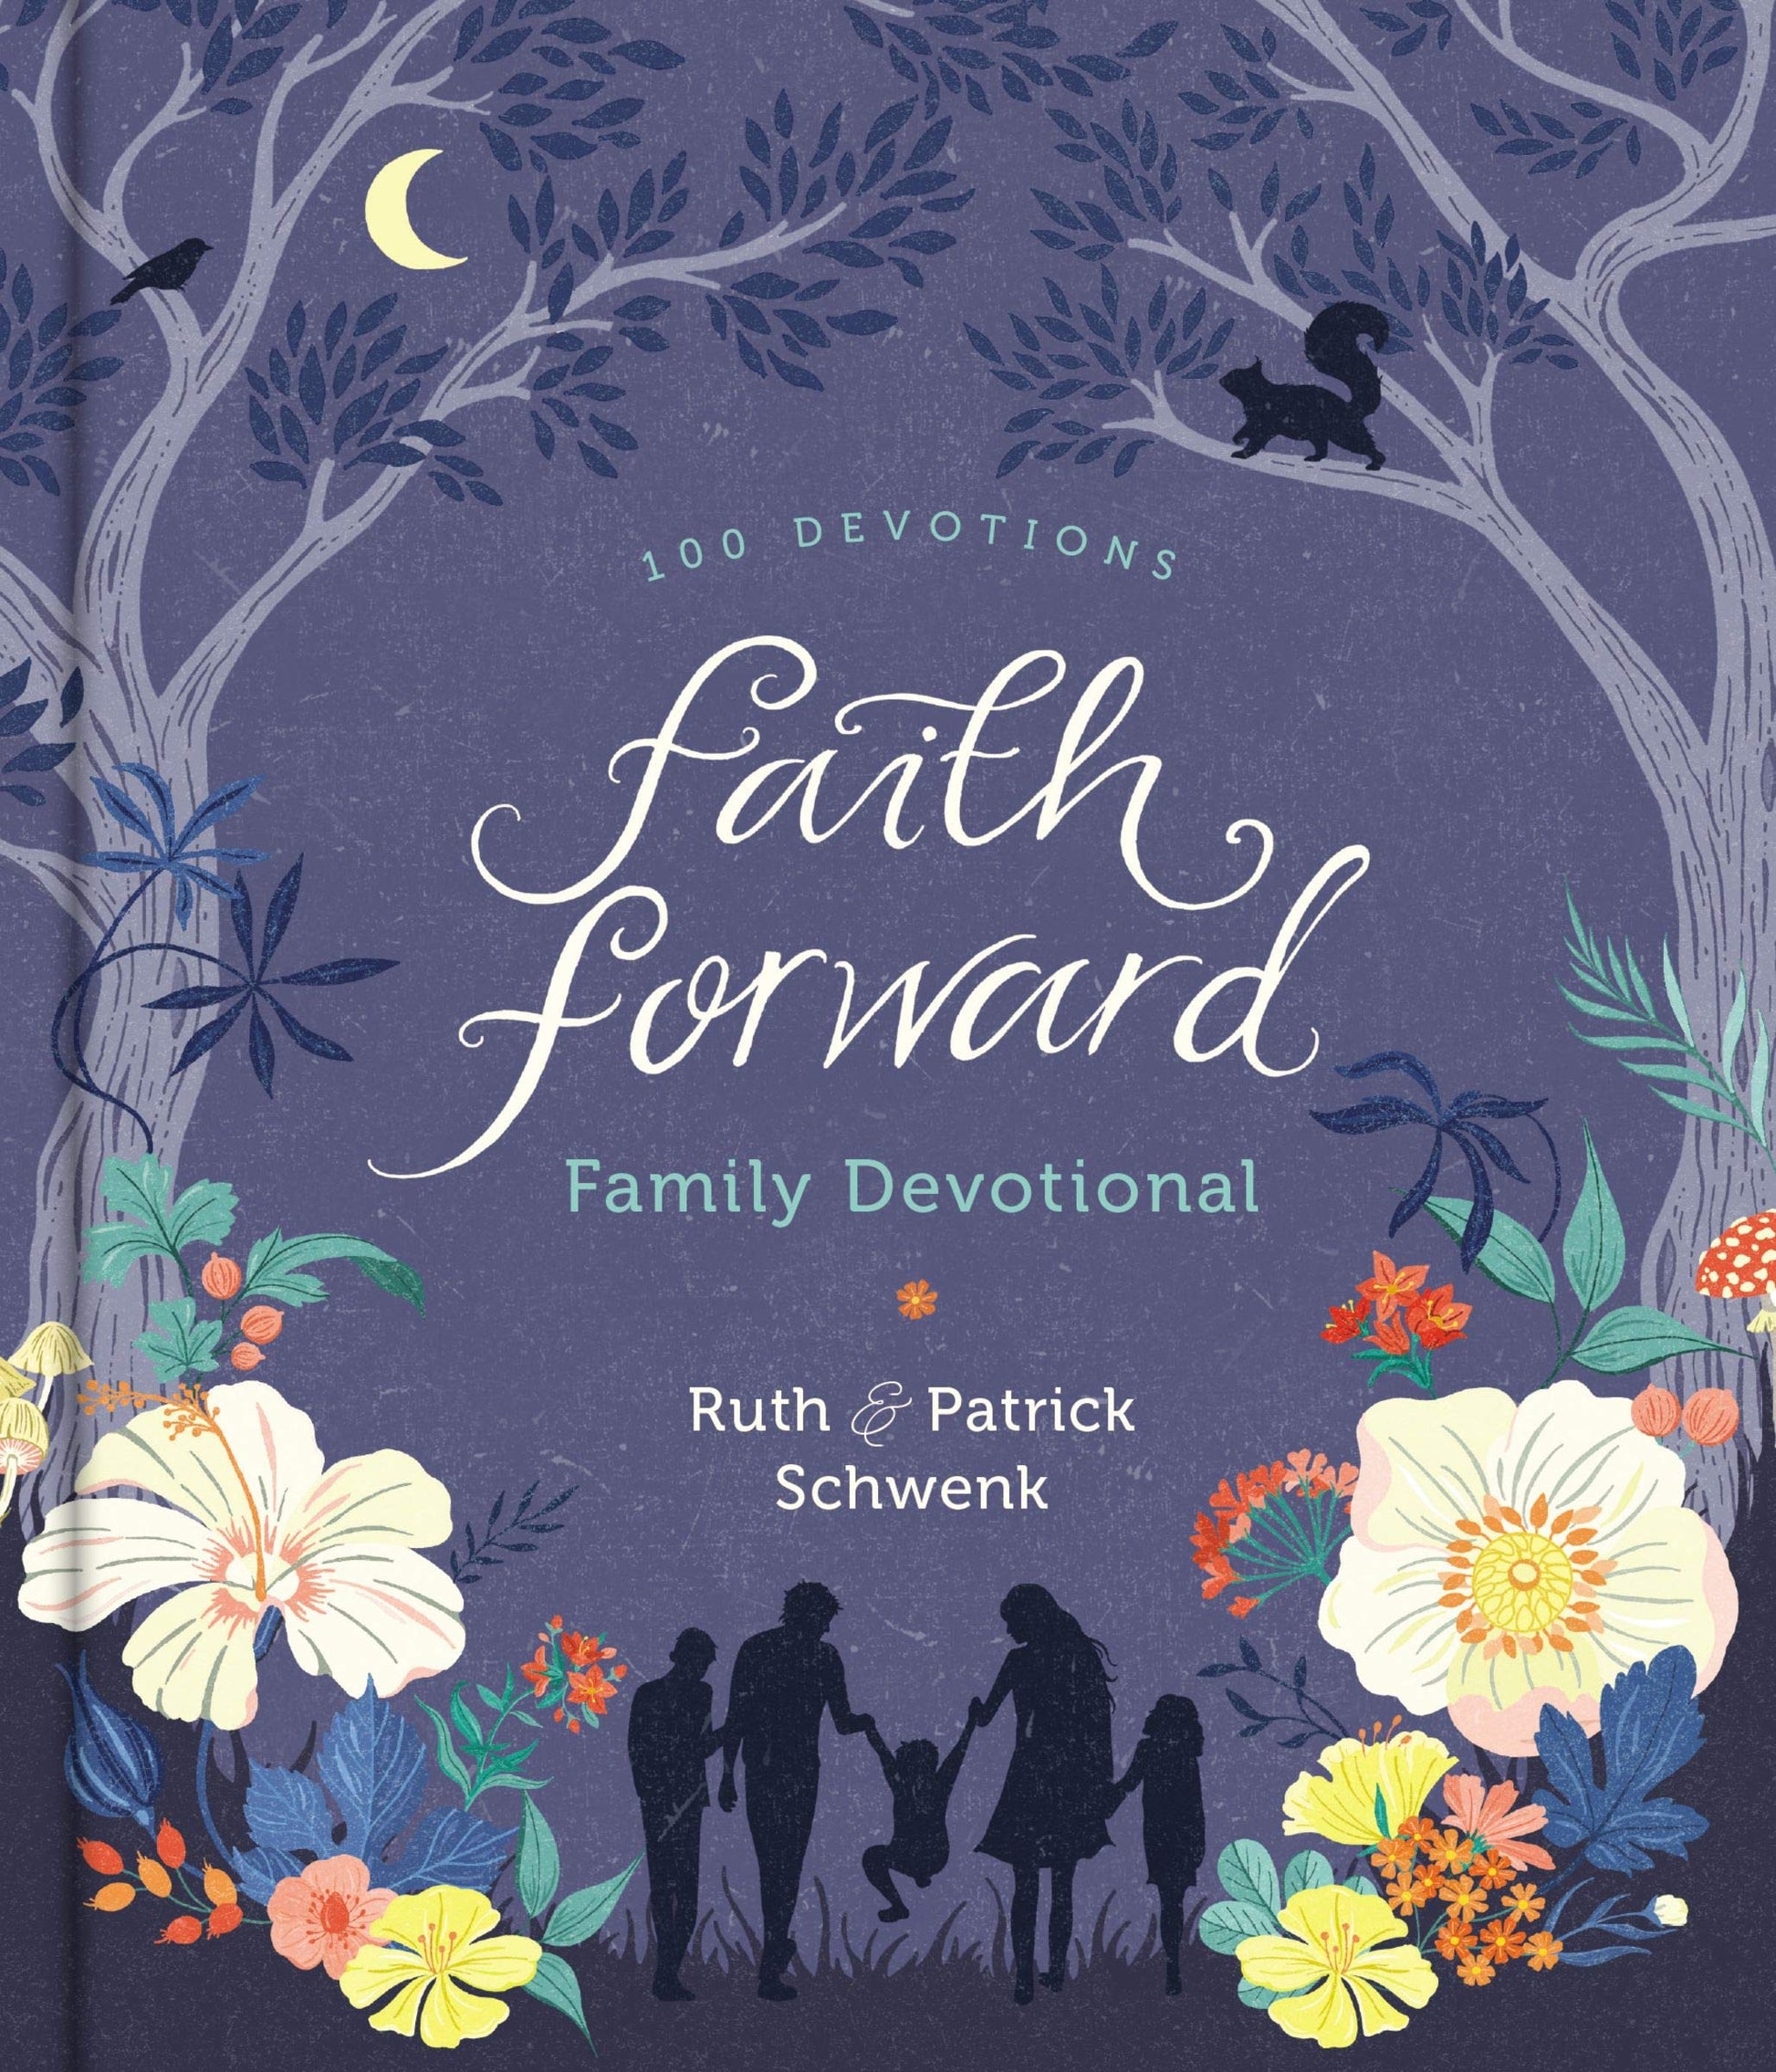 cover of book is a forest with flowers and a family walking with title